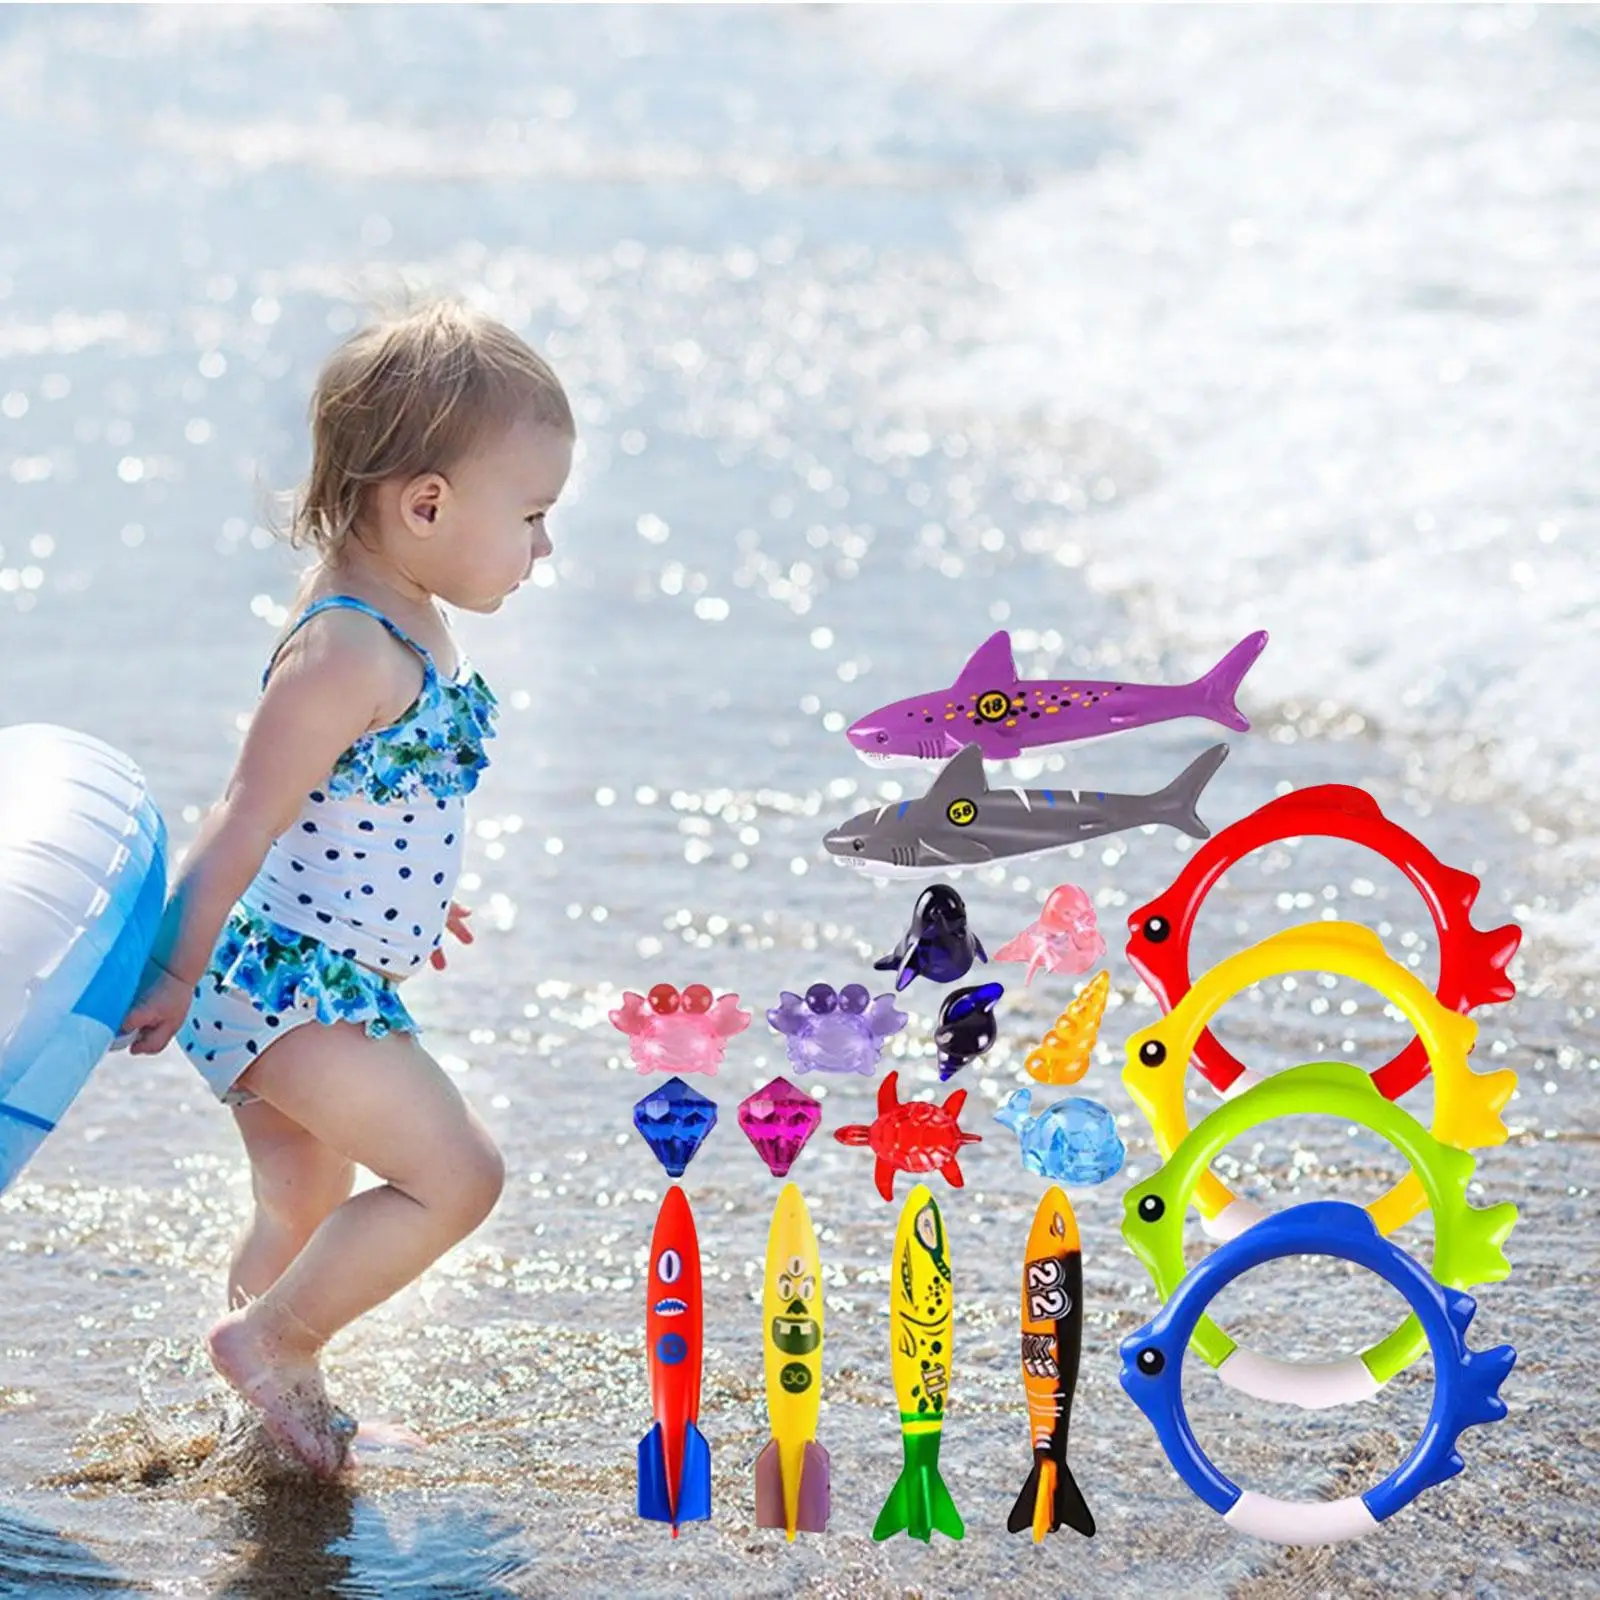 20x Toddler Pool Toys Party Favors Sea Animals Underwater Dive Gifts Summer Pool Diving Toy for Beach Pool Schools Kids Ages 3+